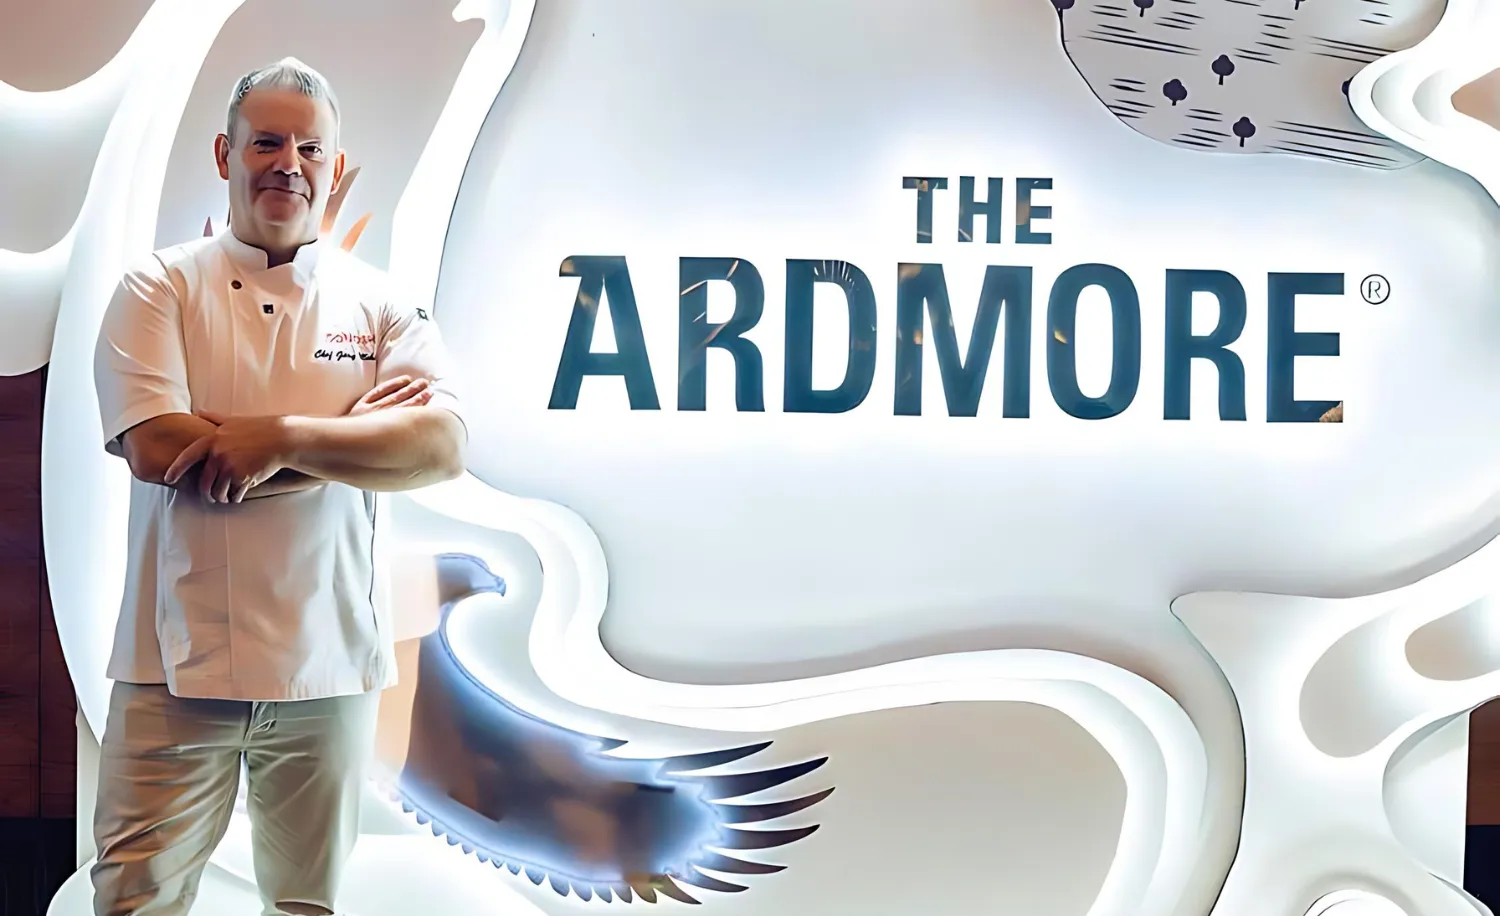 Chef Gary Mehigan and The Ardmore bring special dining experiences 